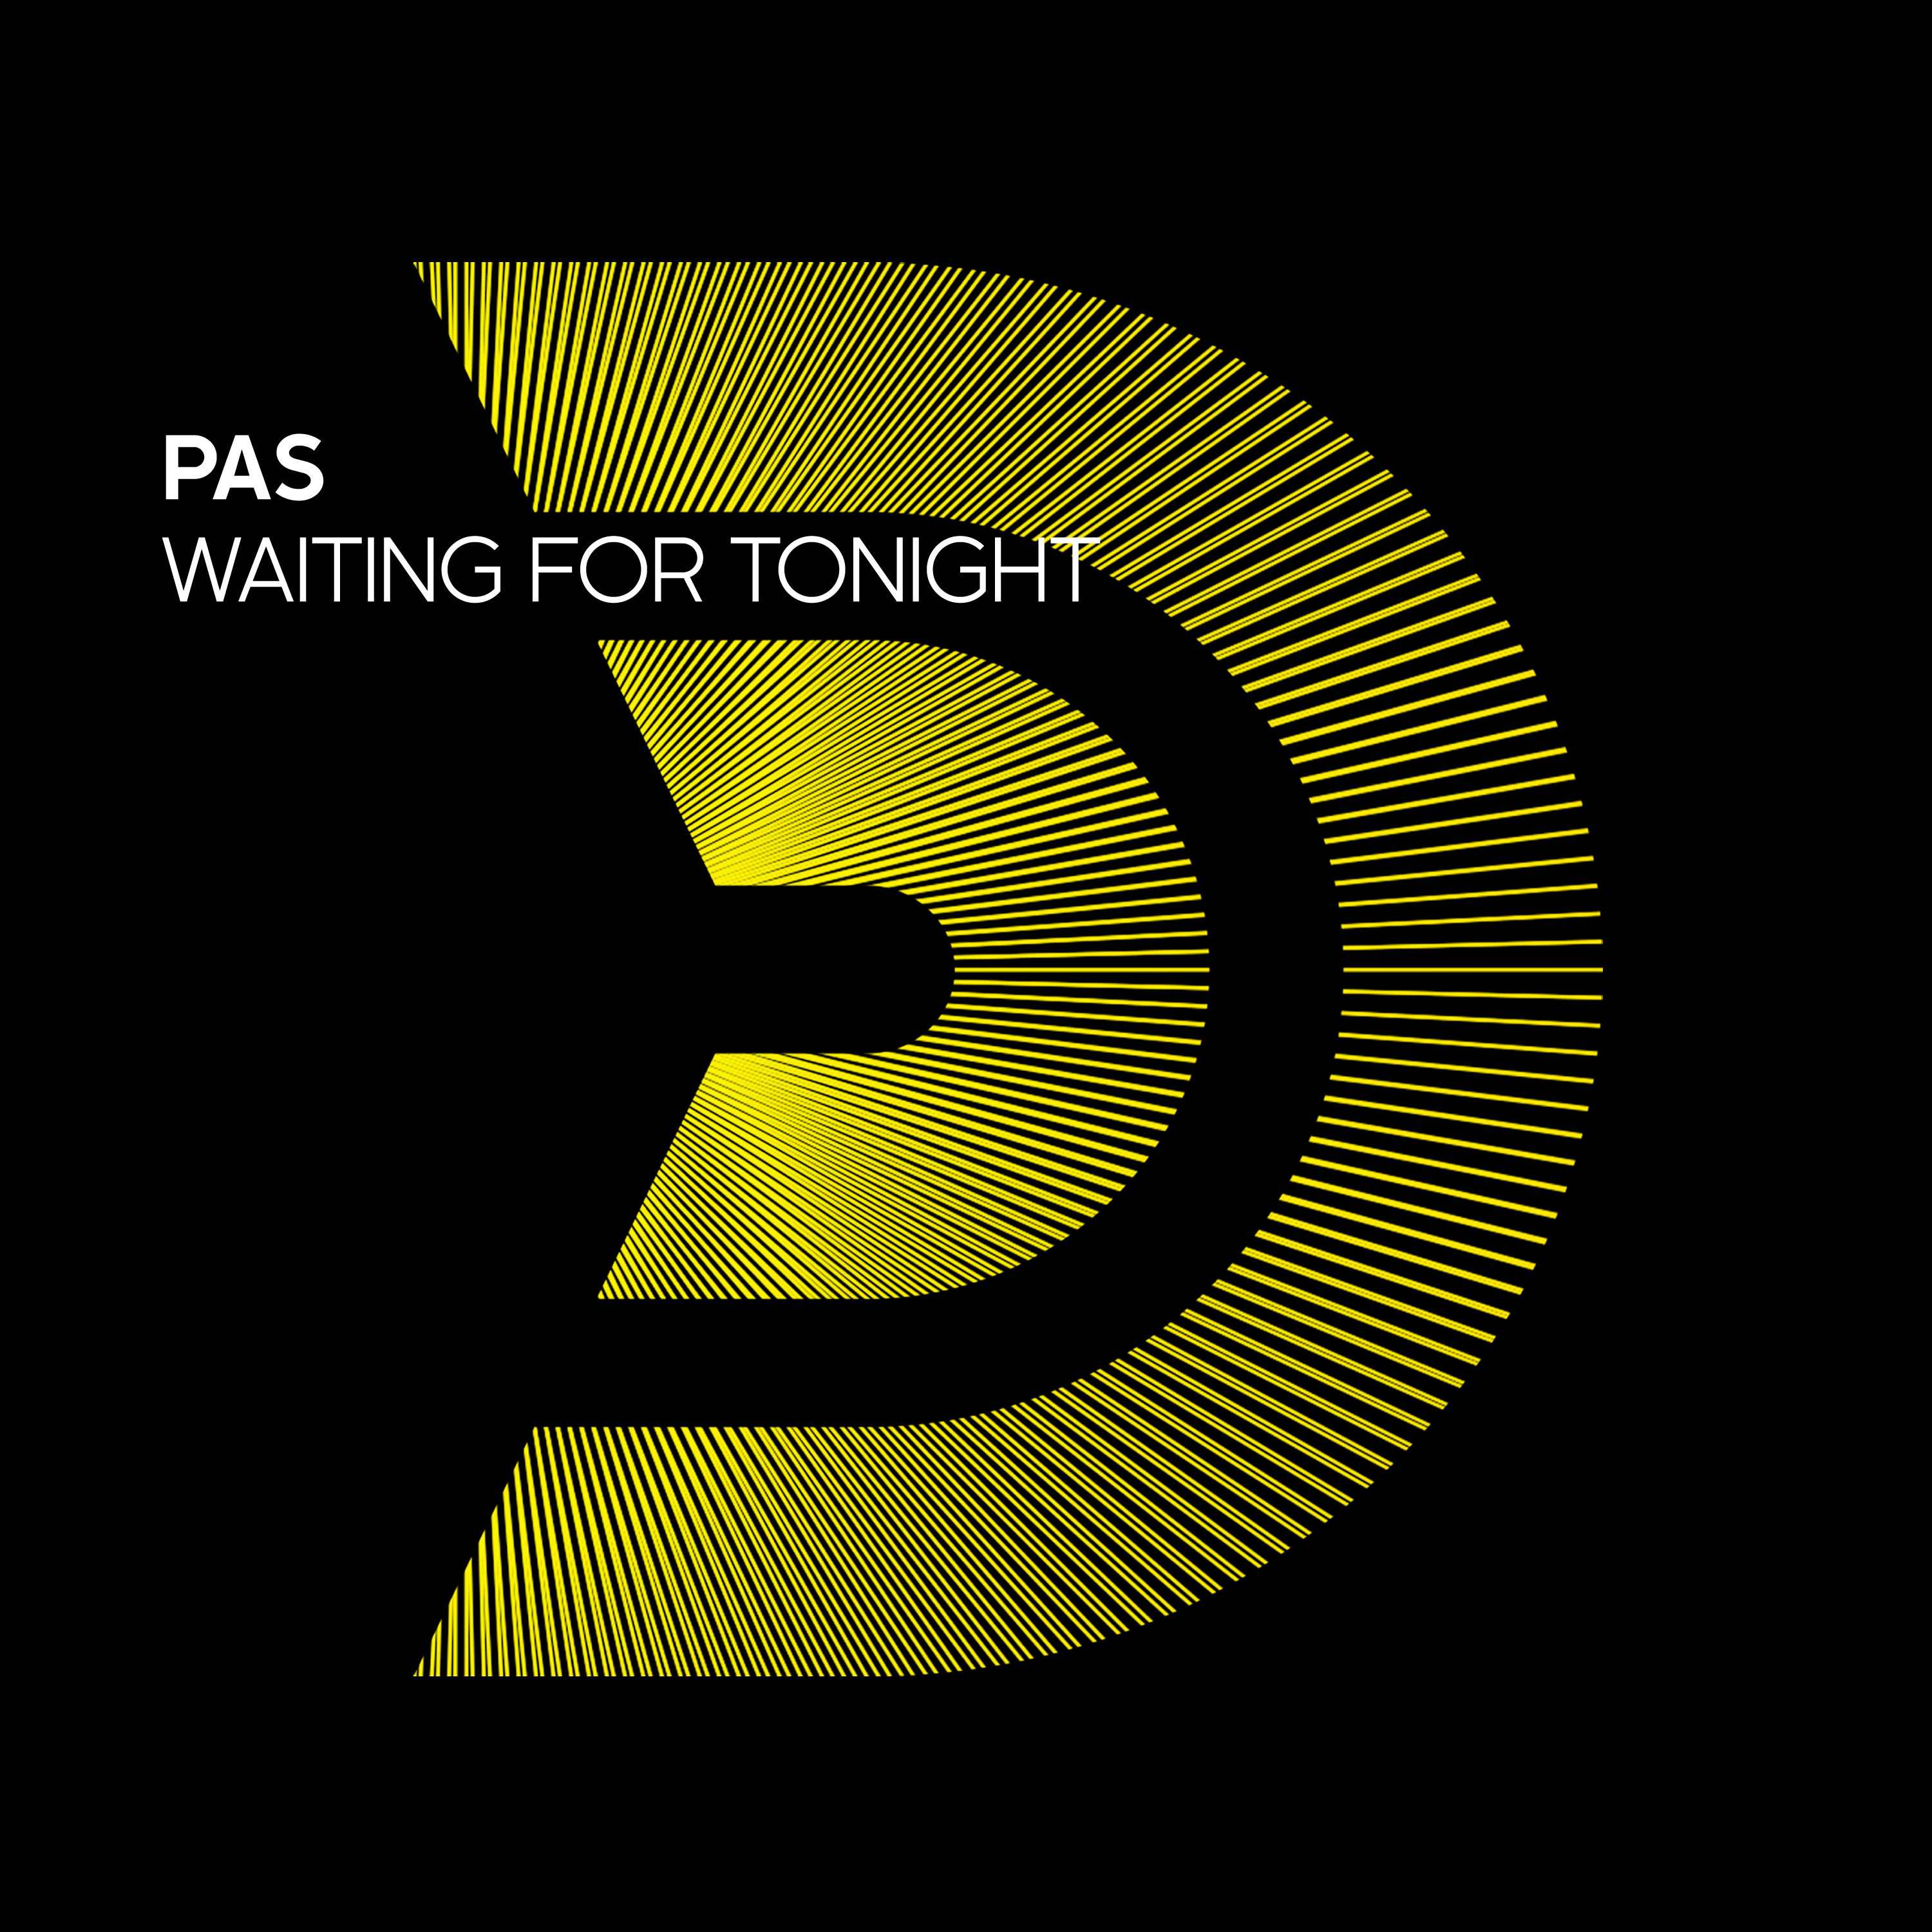 PAS - Waiting for tonight